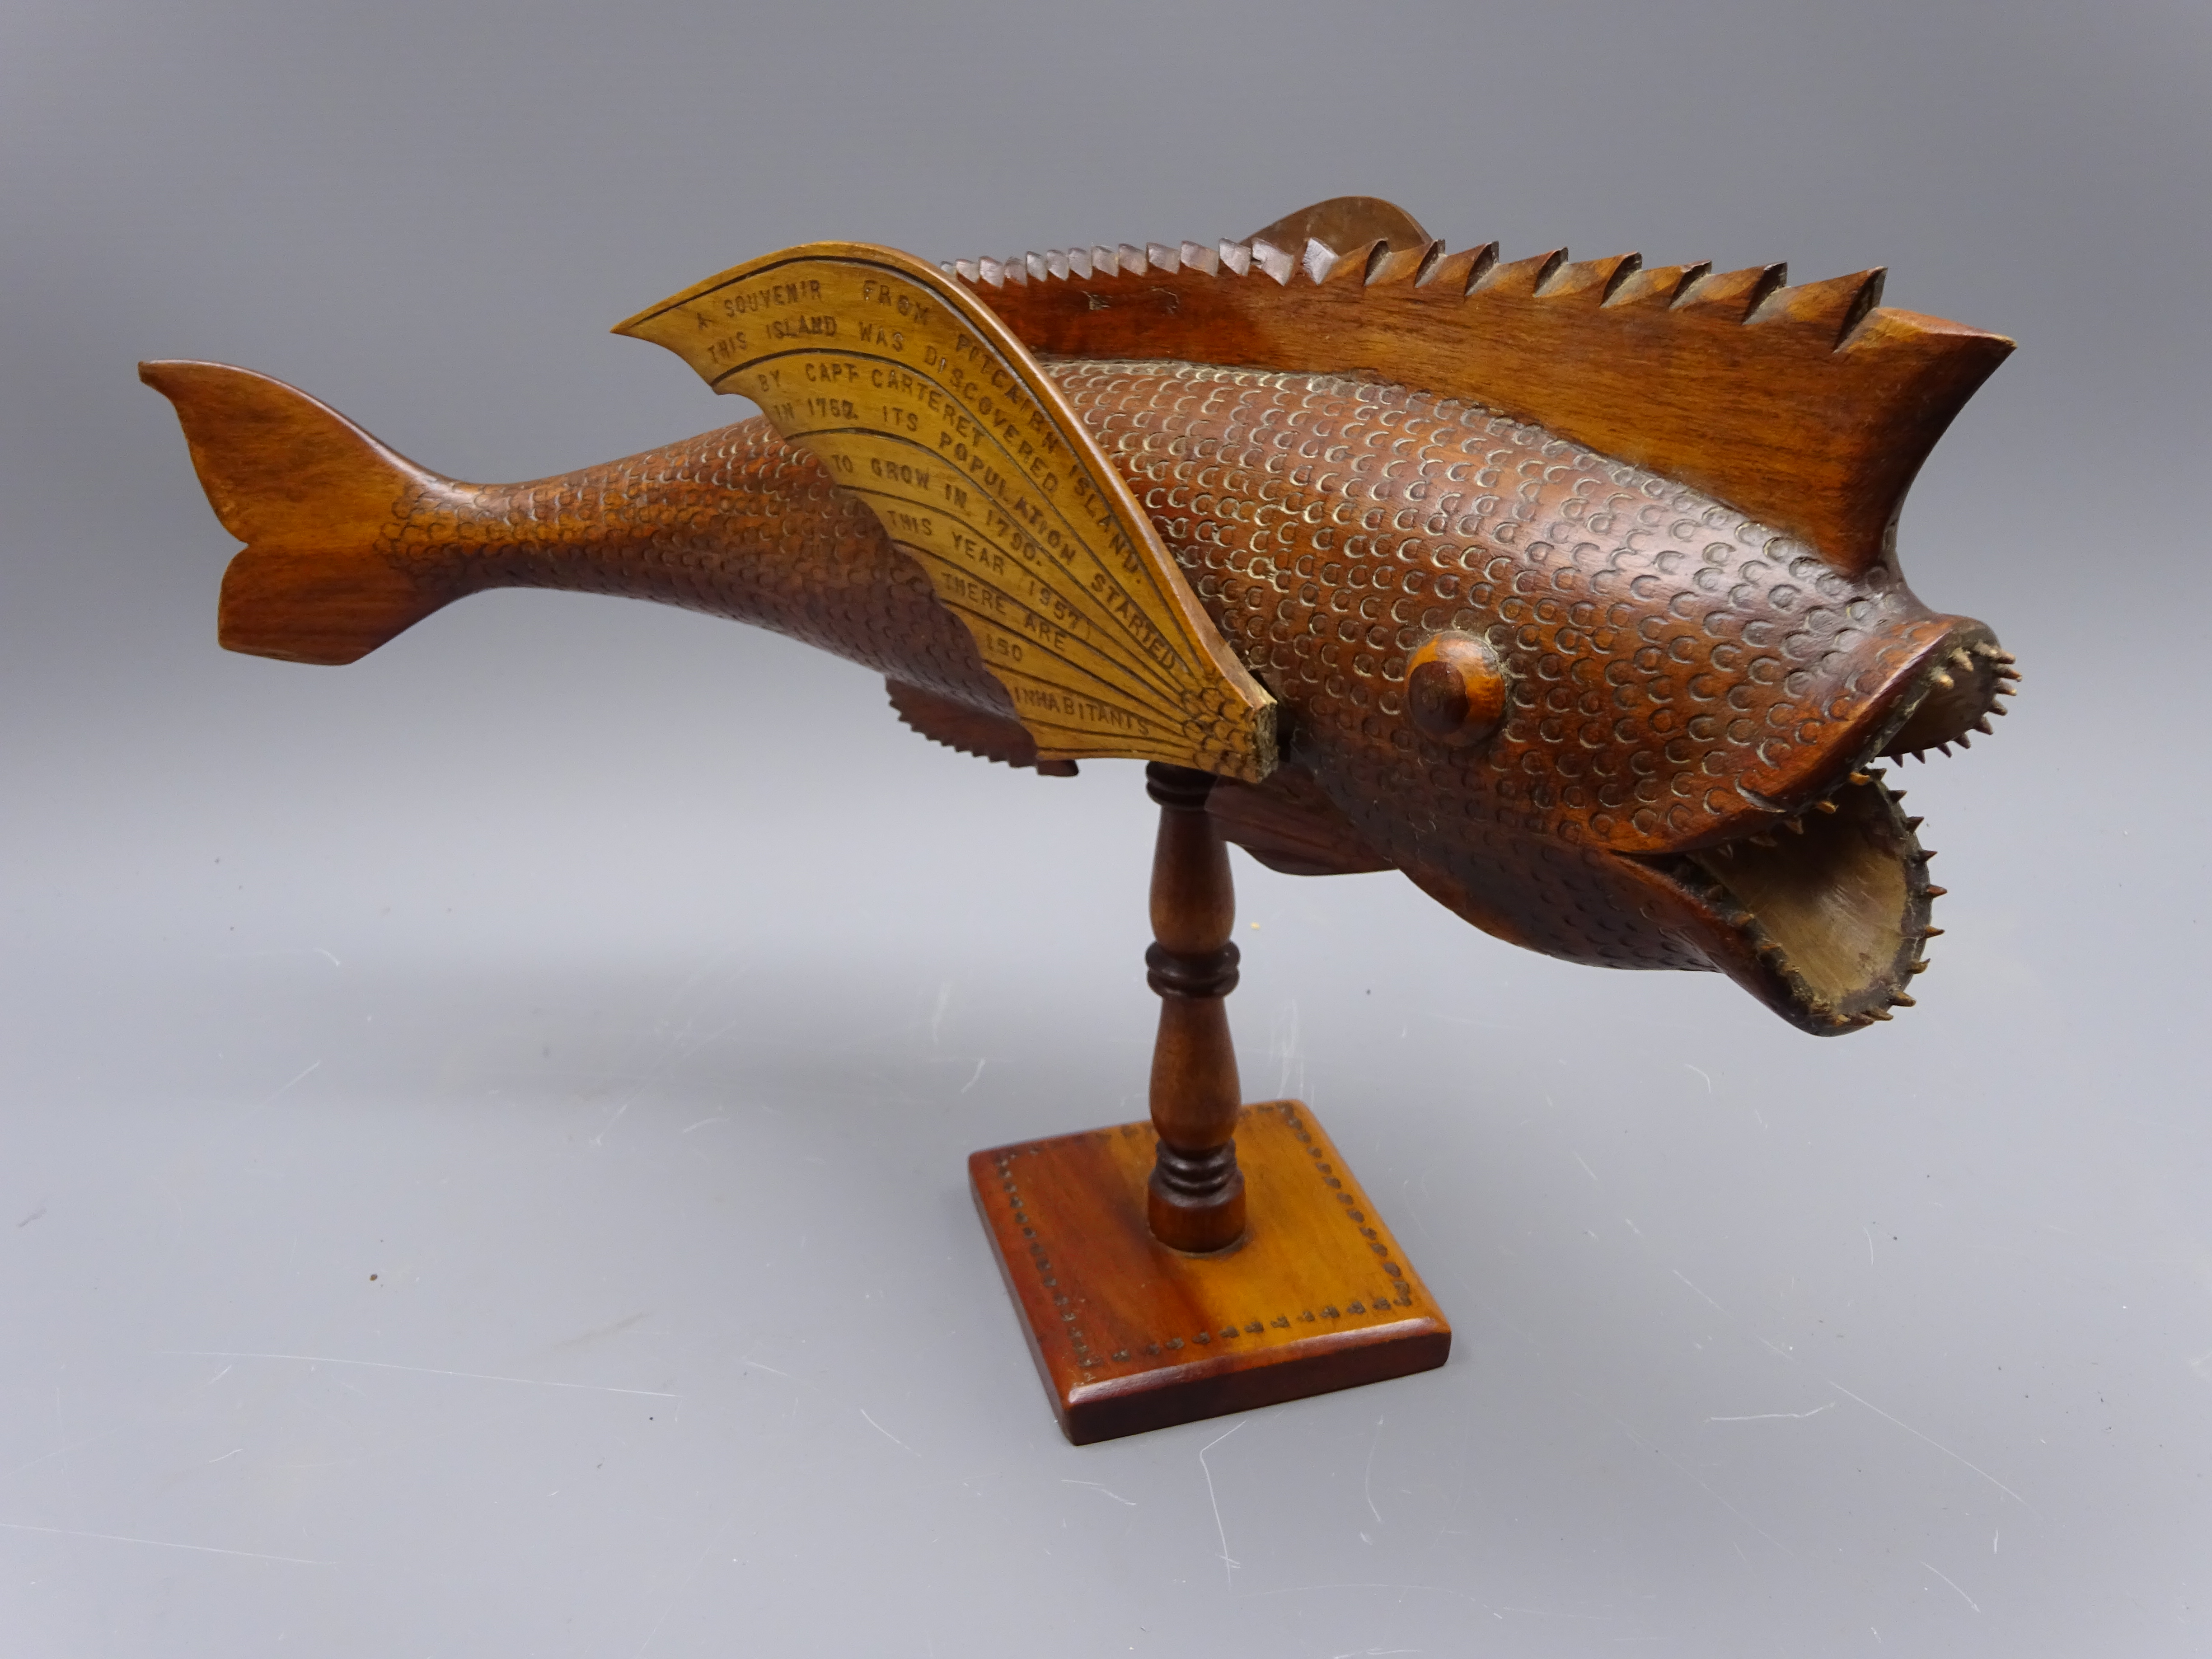 Pitcairn Islands carved wood model of a Fish inscribed 'A Souvenir From Pitcairn Island.